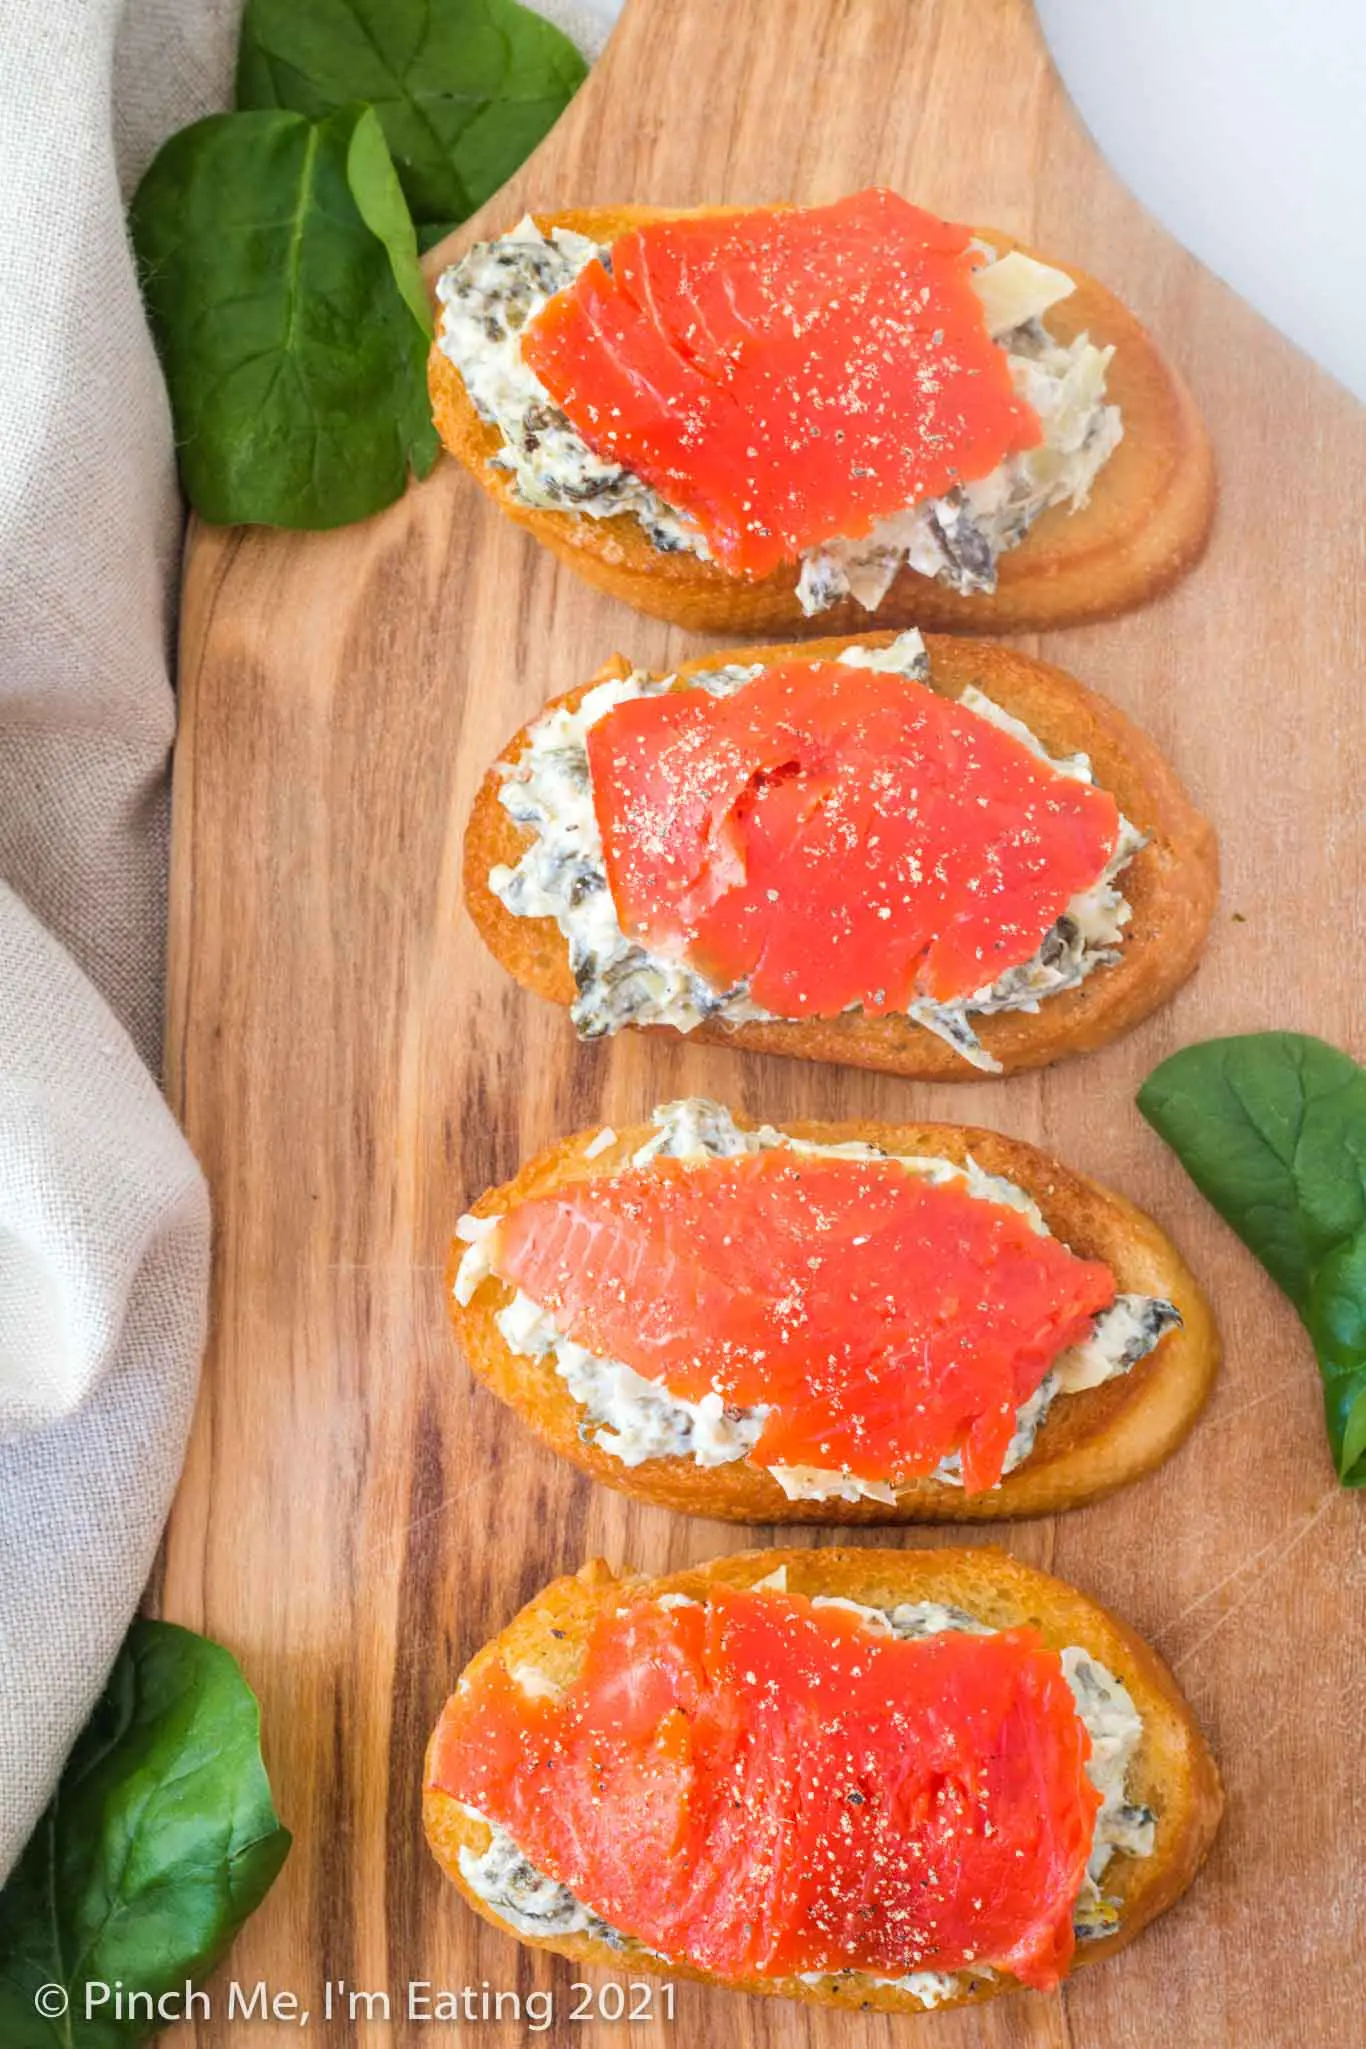 Artichoke spinach dip crostini with smoked salmon on a wooden cutting board